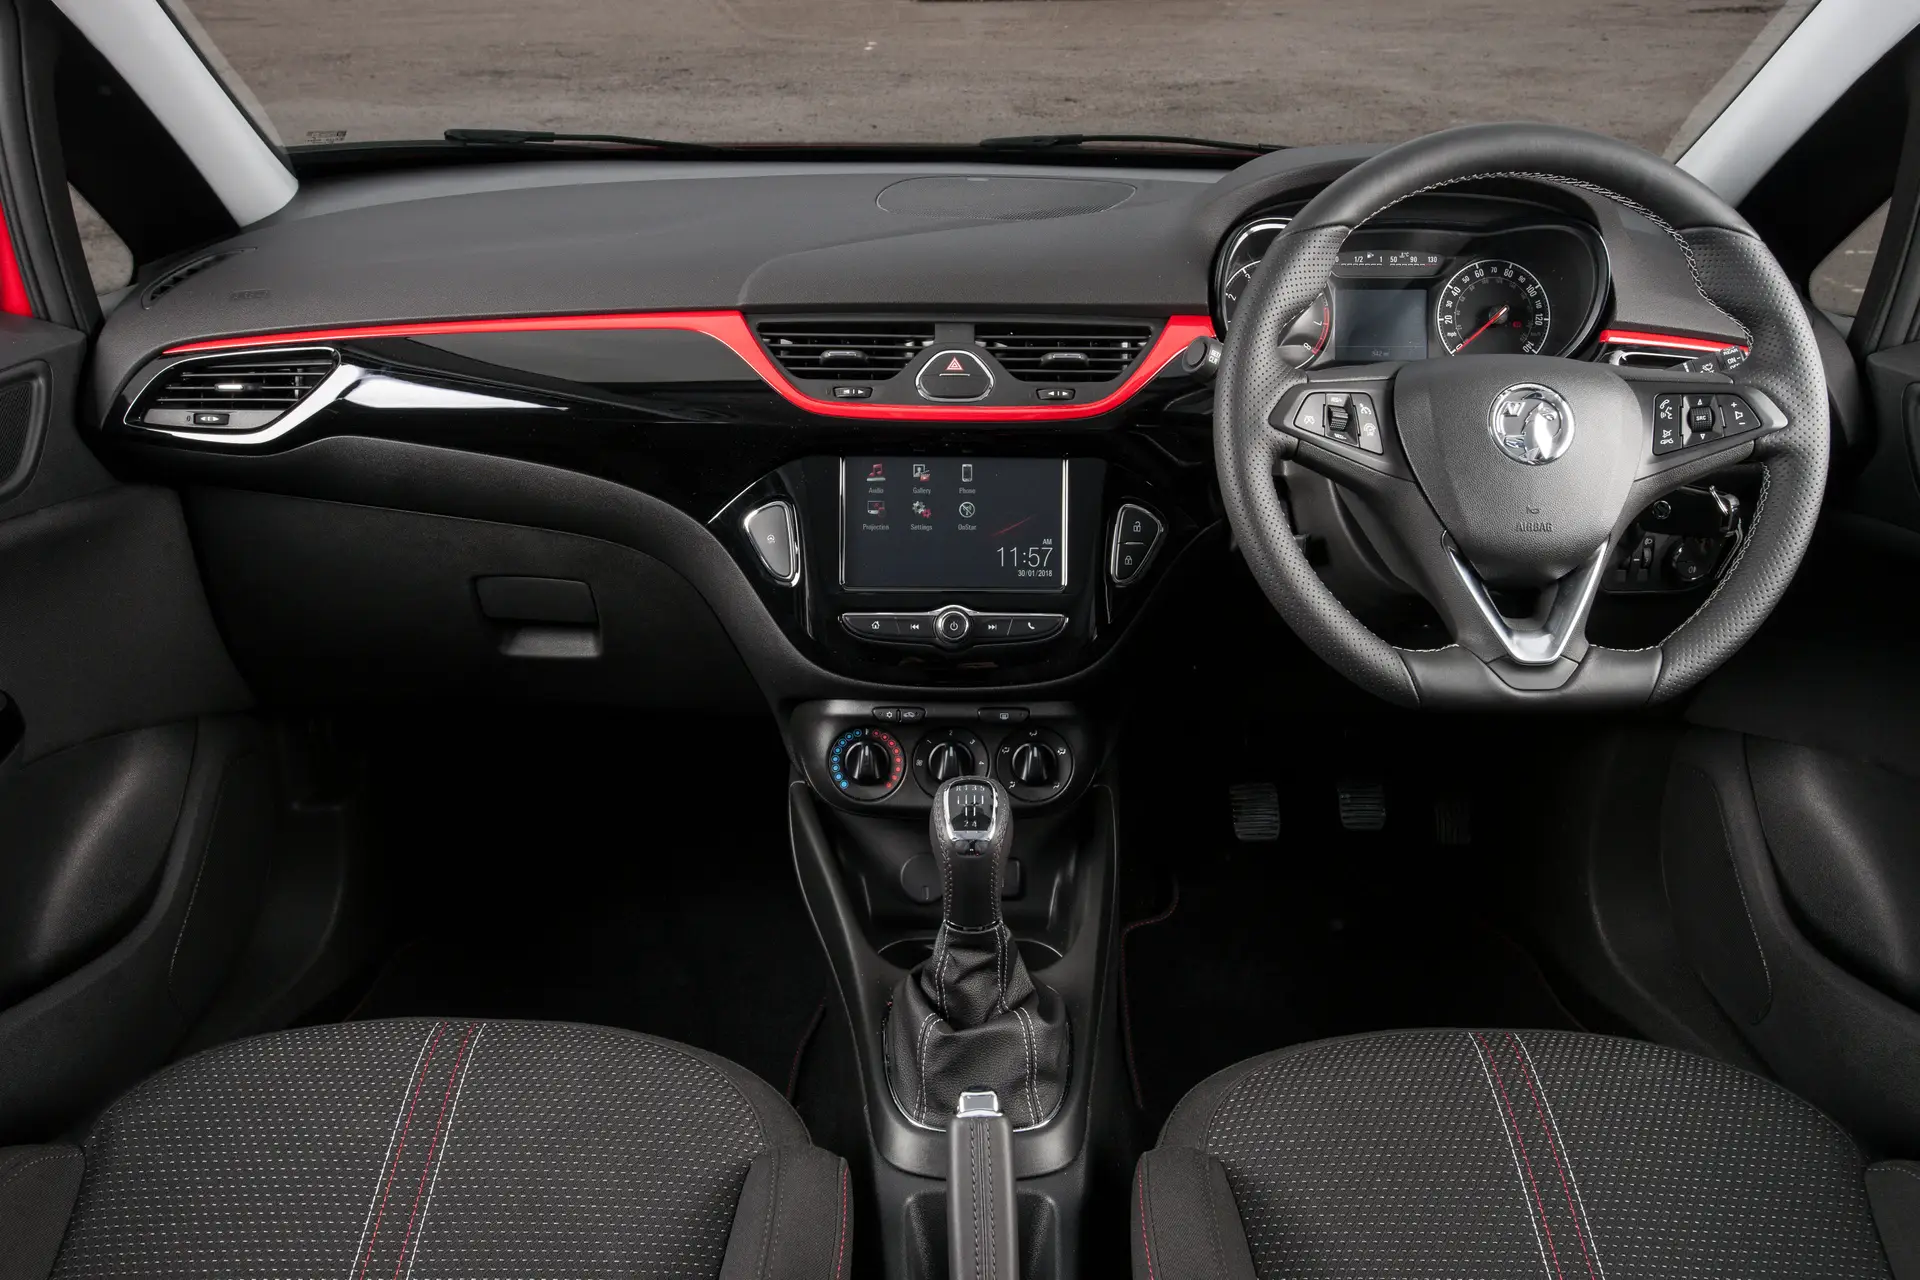 Used Vauxhall Corsa (2014-2019) Review: interior close up photo of the Vauxhall Corsa dashboard